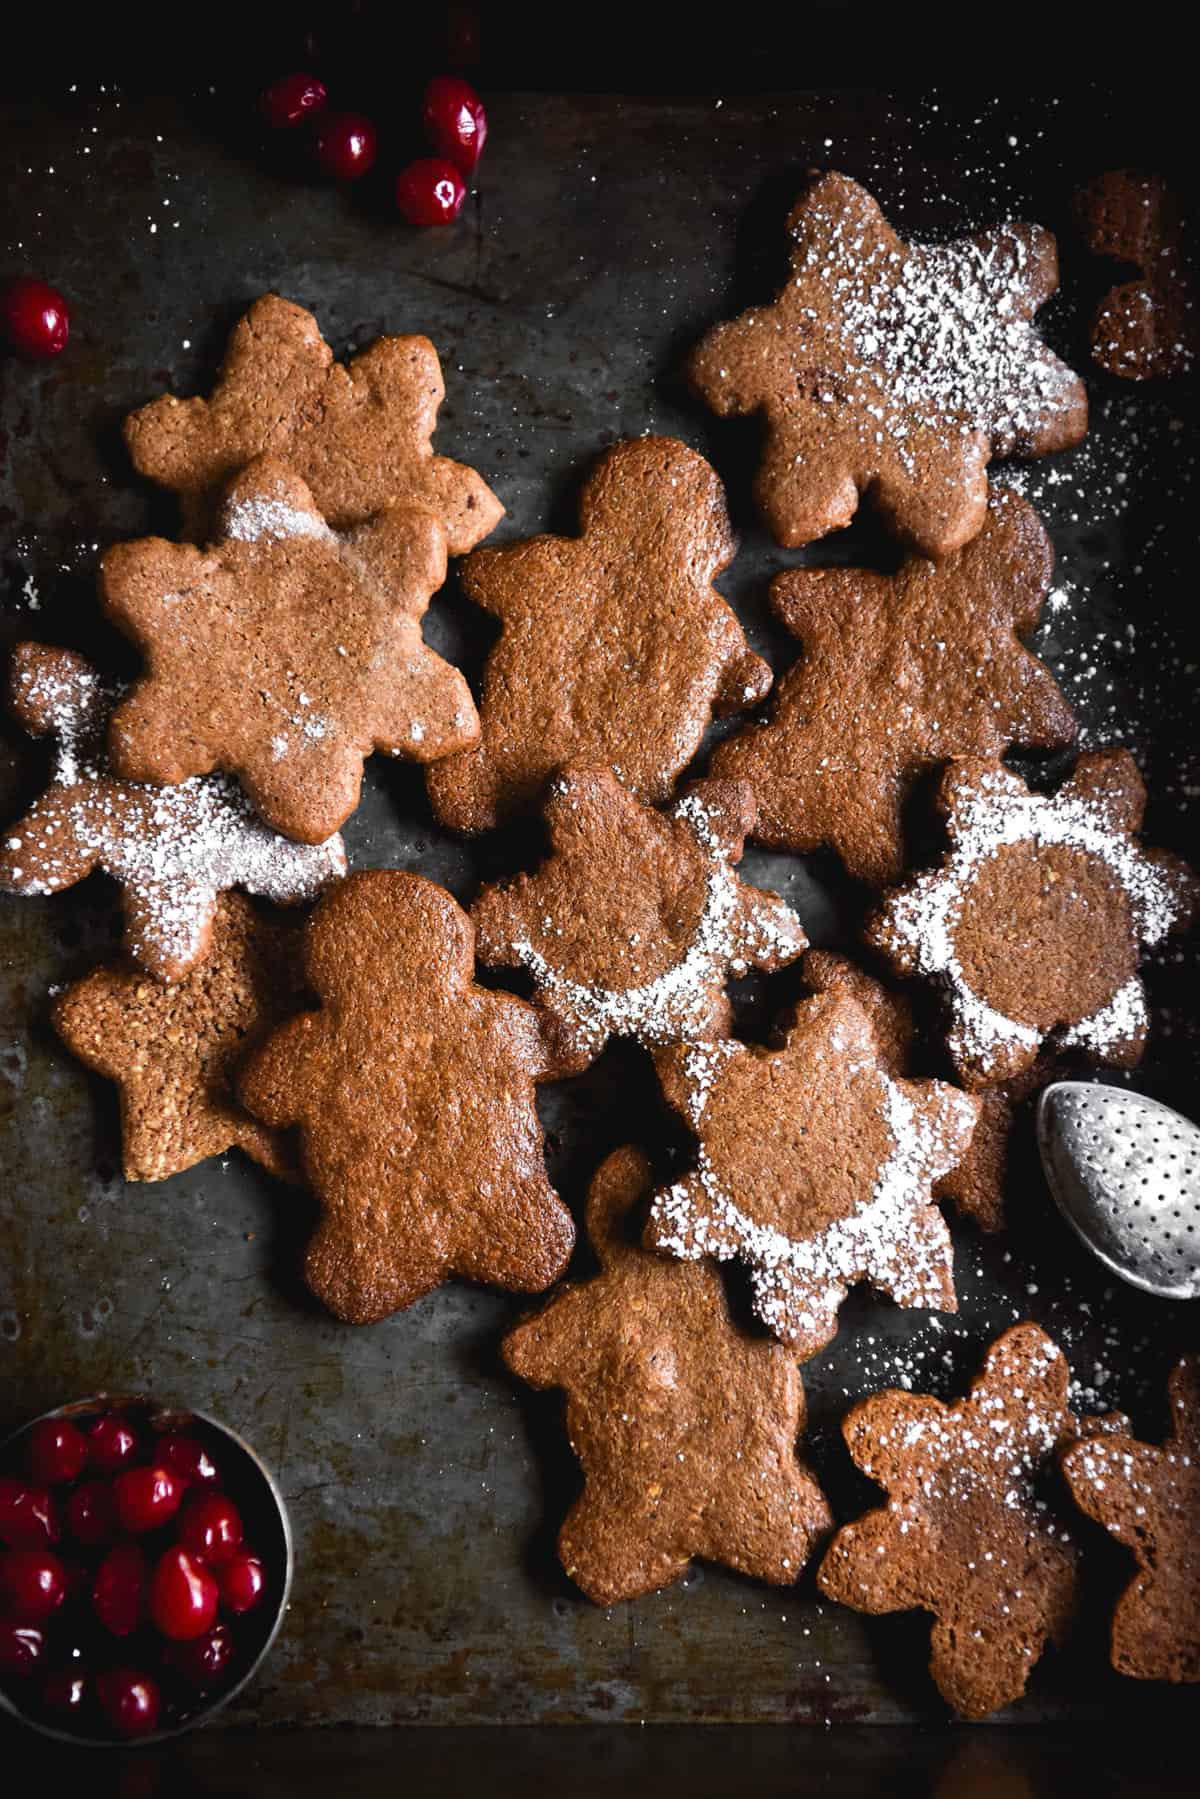 Grain free gingerbread arranged in a pile on a mottled dark blue steel backdrop. The gingerbread are cut into various shapes and some are sprinkled with icing sugar